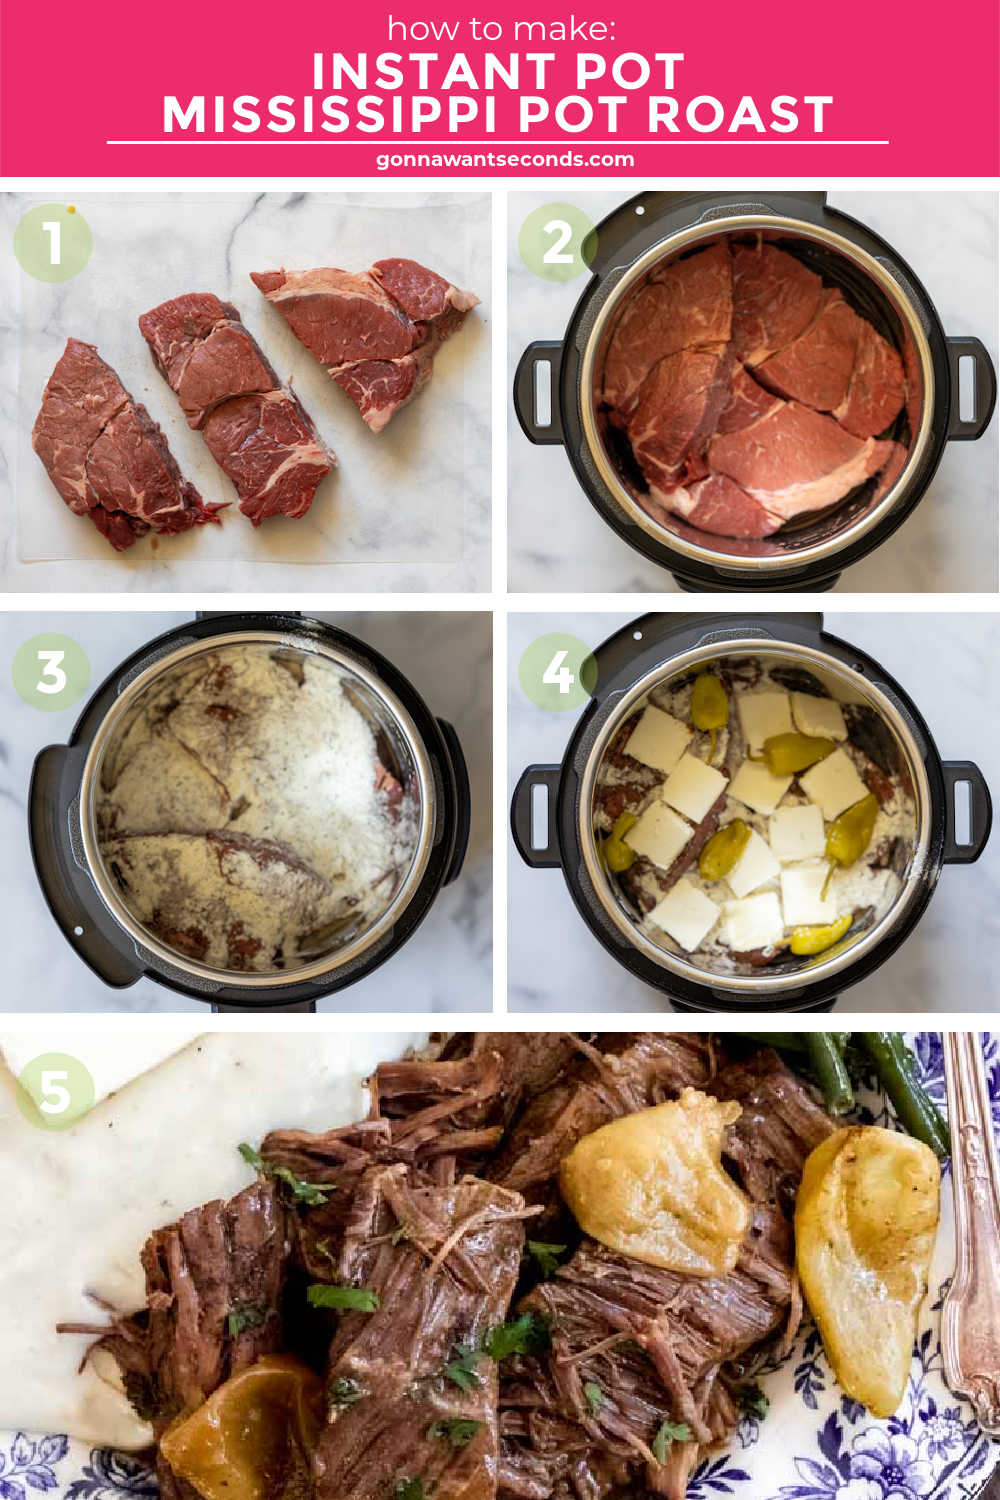 step by step how to make instant pot mississippi pot roast 